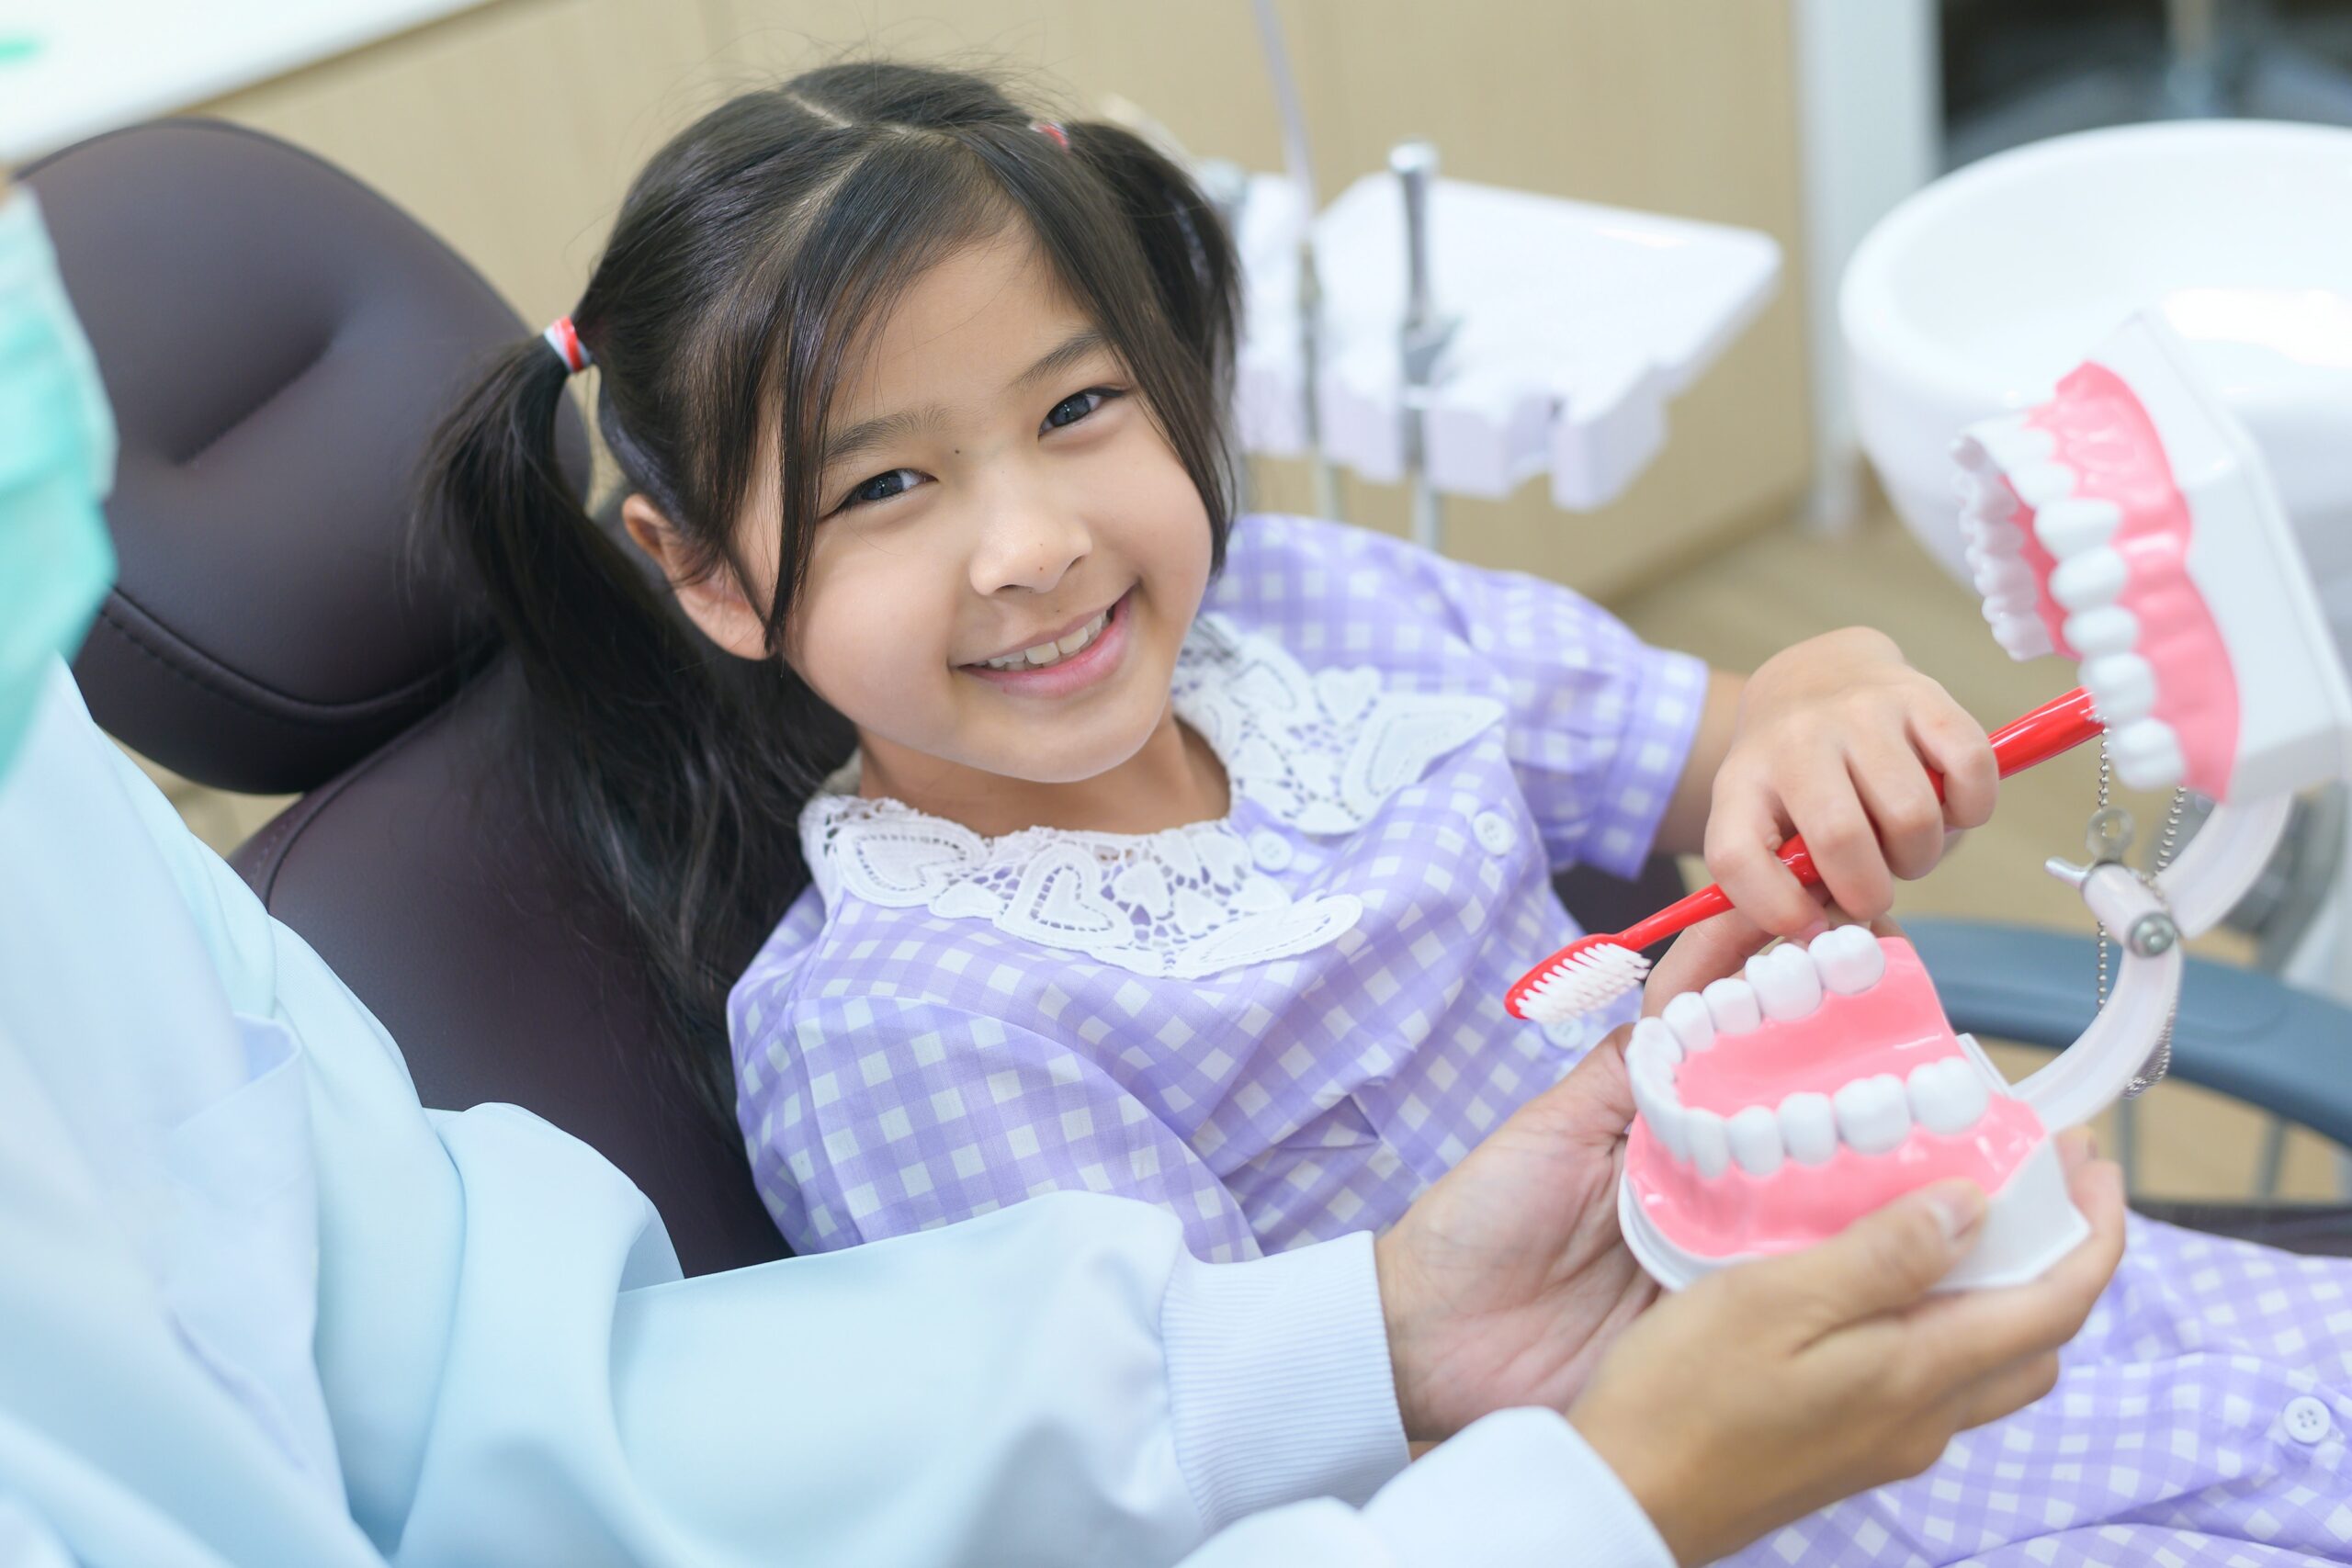 Tips to Help Your Child Cope with Dental Anxiety